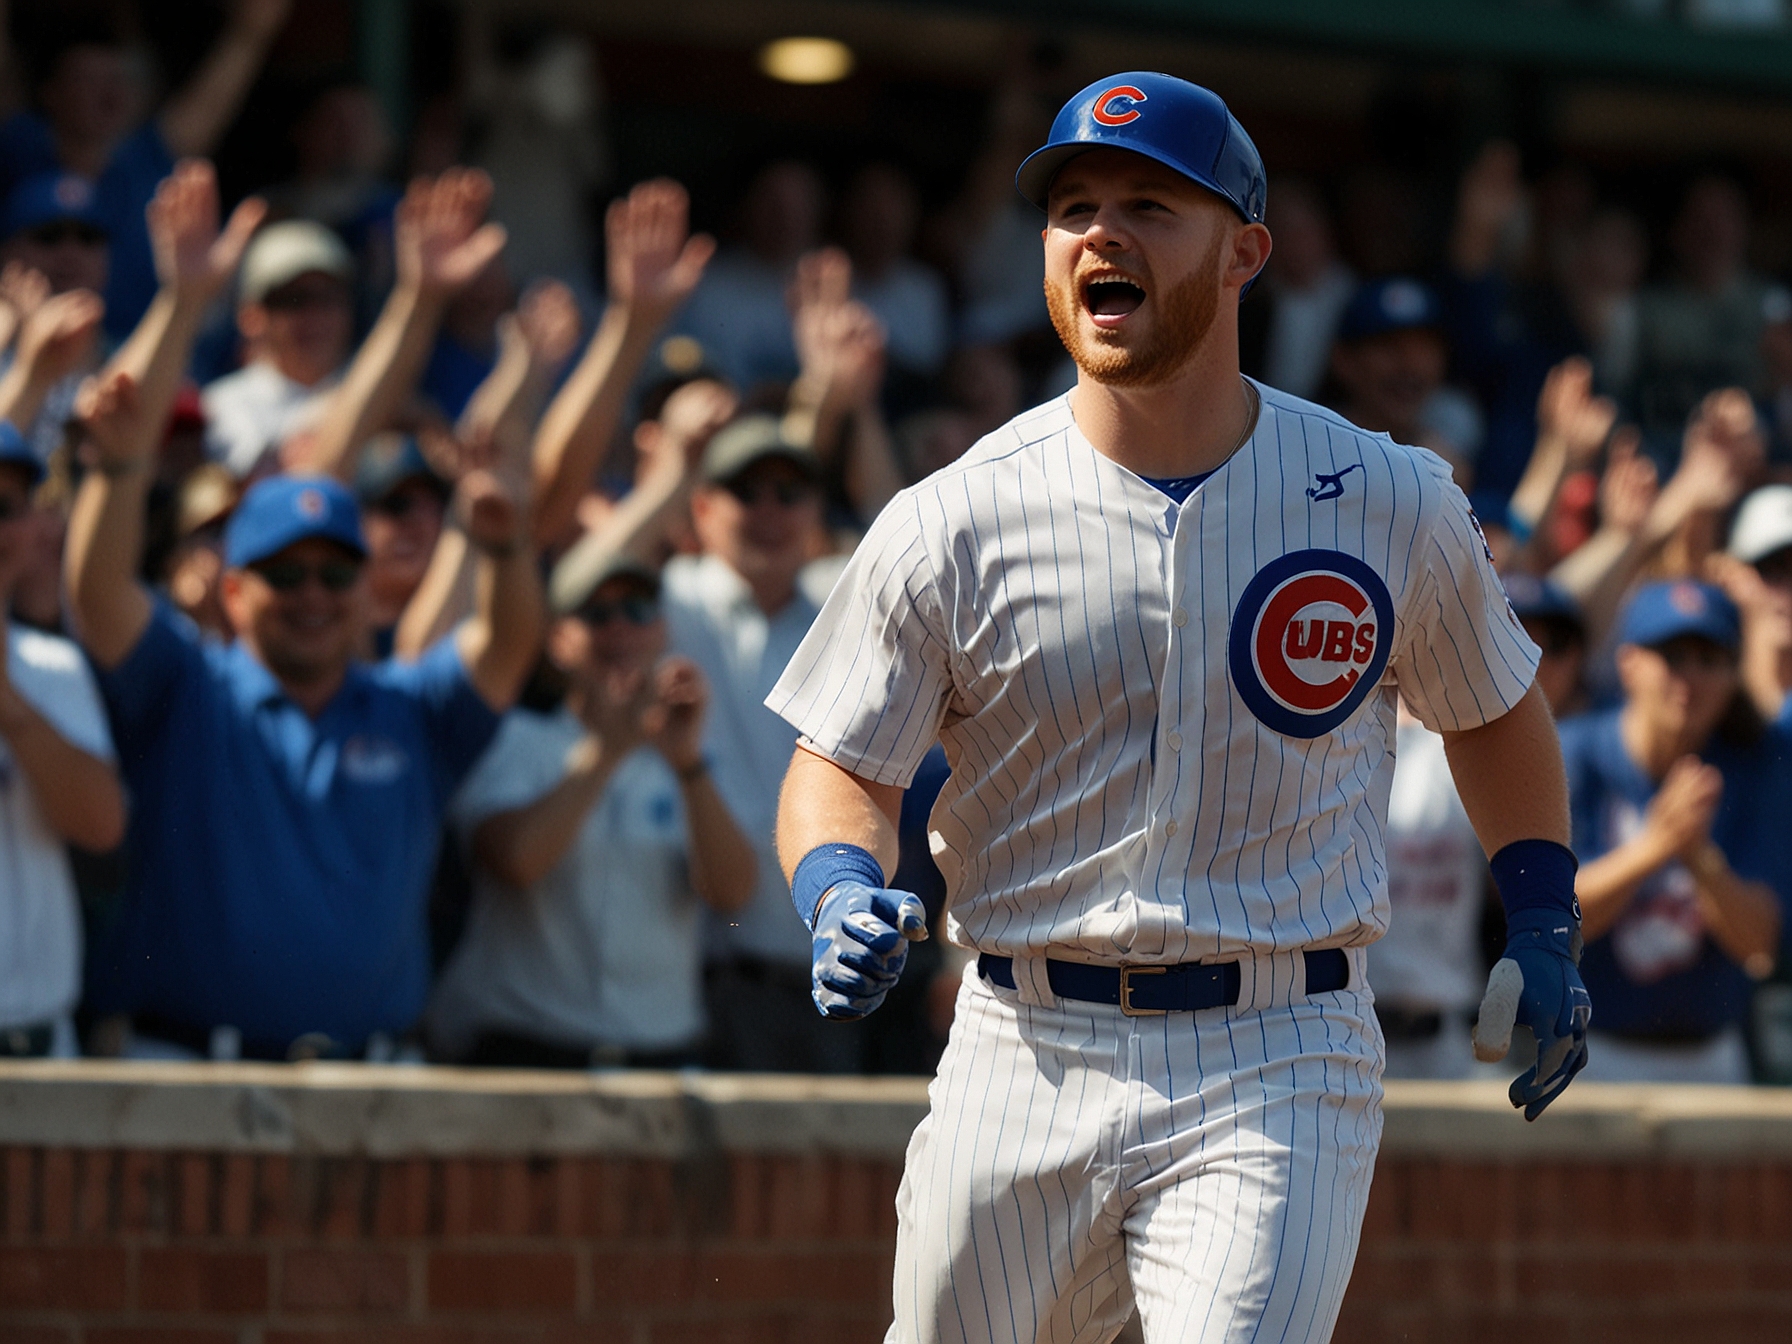 Ian Happ of the Chicago Cubs celebrates rounding the bases after hitting a game-changing two-run homer in the eighth inning, with fans in Wrigley Field erupting in joyous applause.